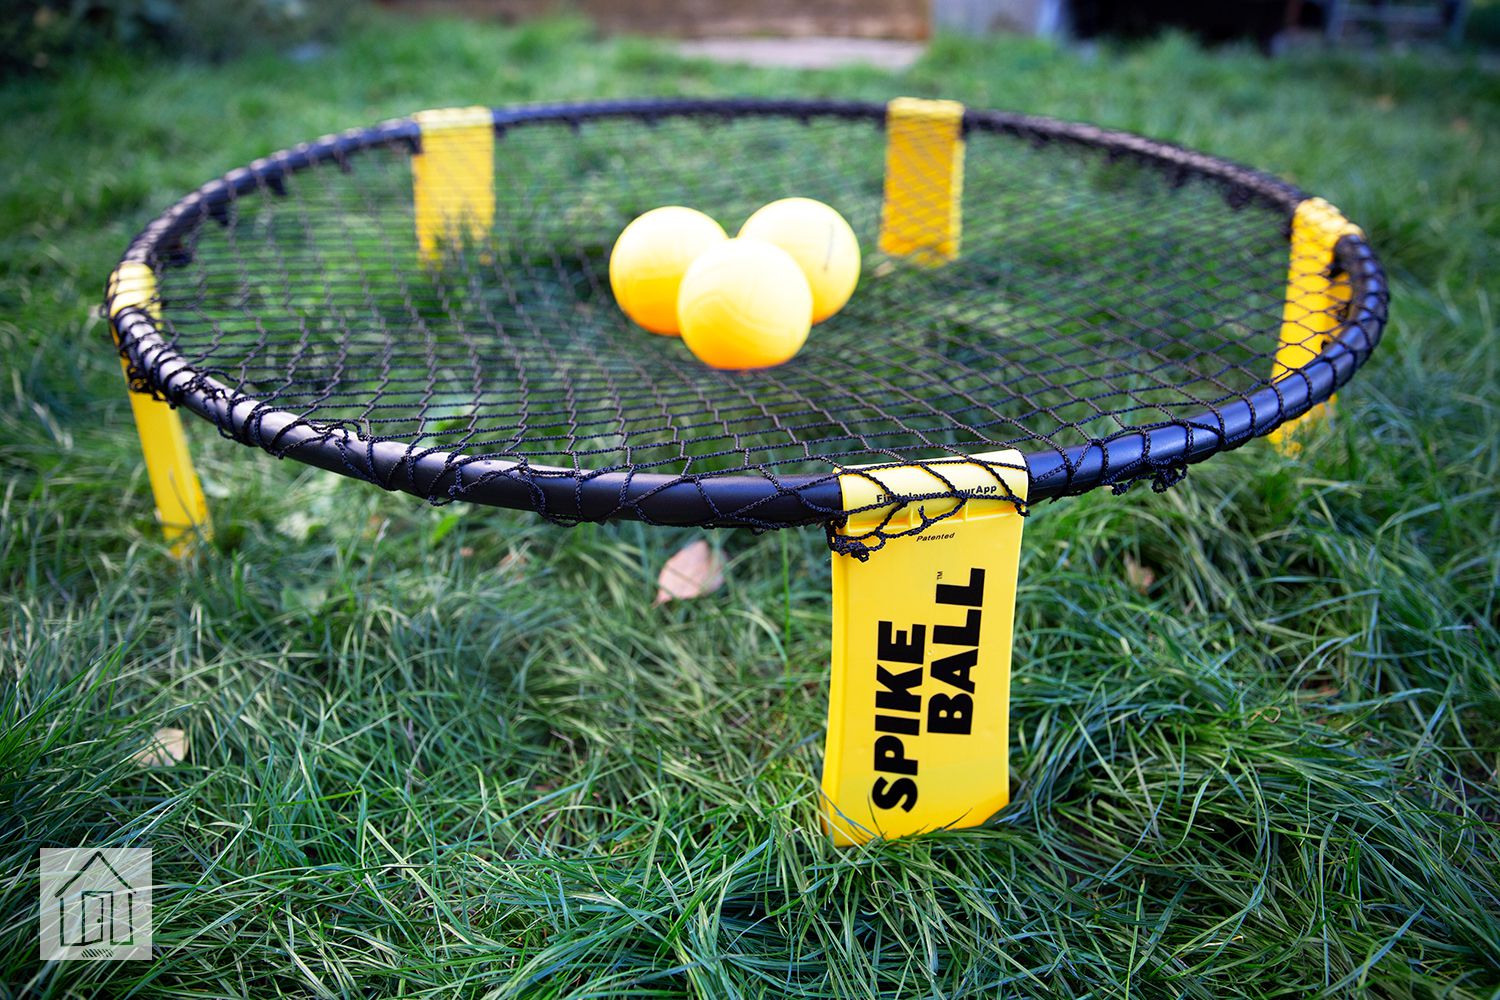 New Spikeball tournament tradition brings fun and excitement to students